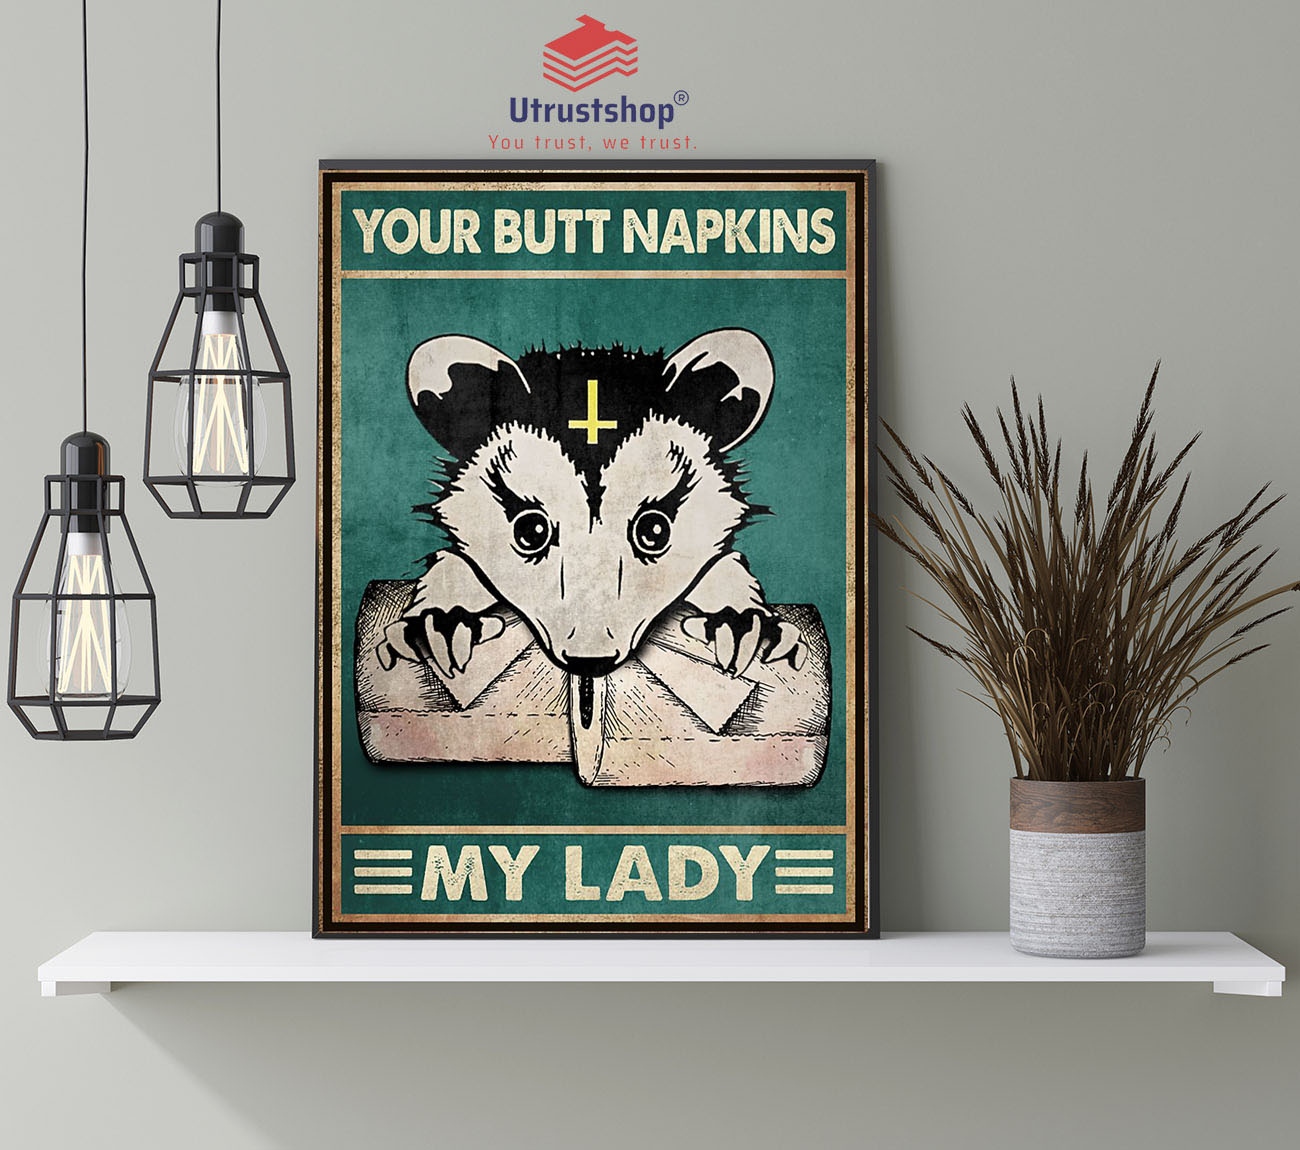 Your butt napkins my lady poster4